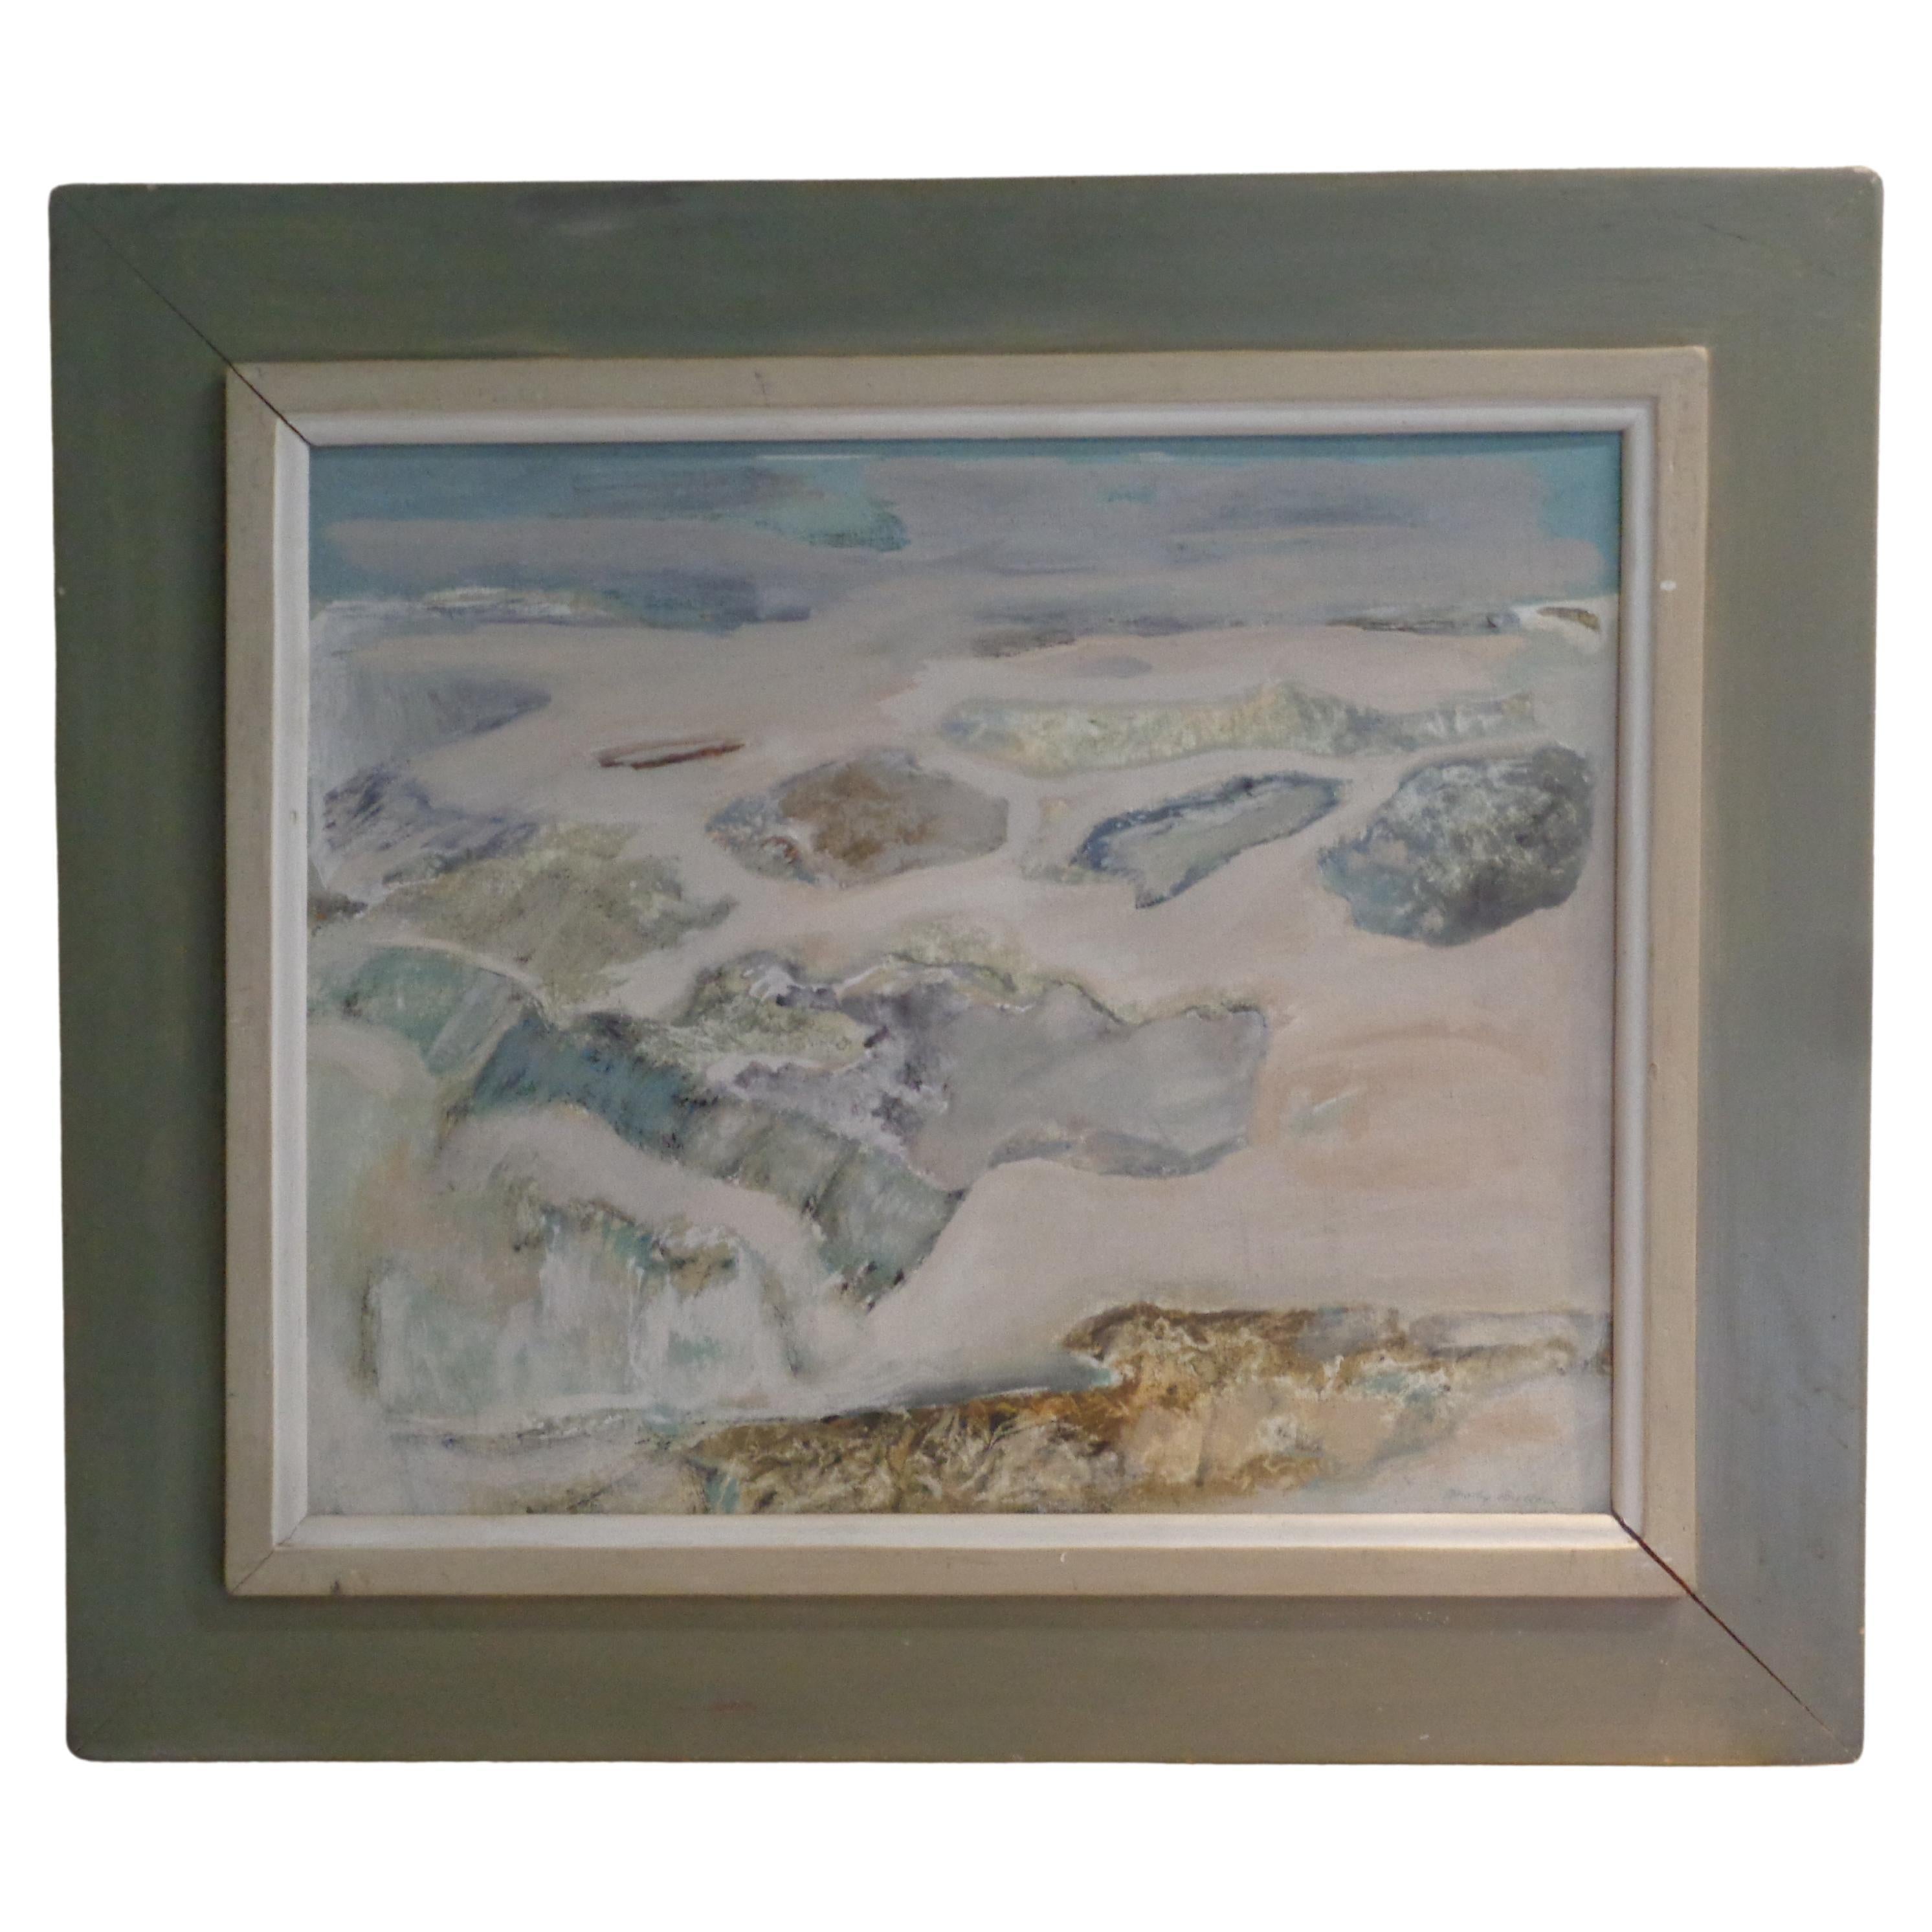 American impressionist ocean beach scene oil painting on artist board in very nice original soft blue gray and white painted wood frame. Artist signed Dorothy Bullock lower right corner. Exhibition label and award medal on reverse. Titled 